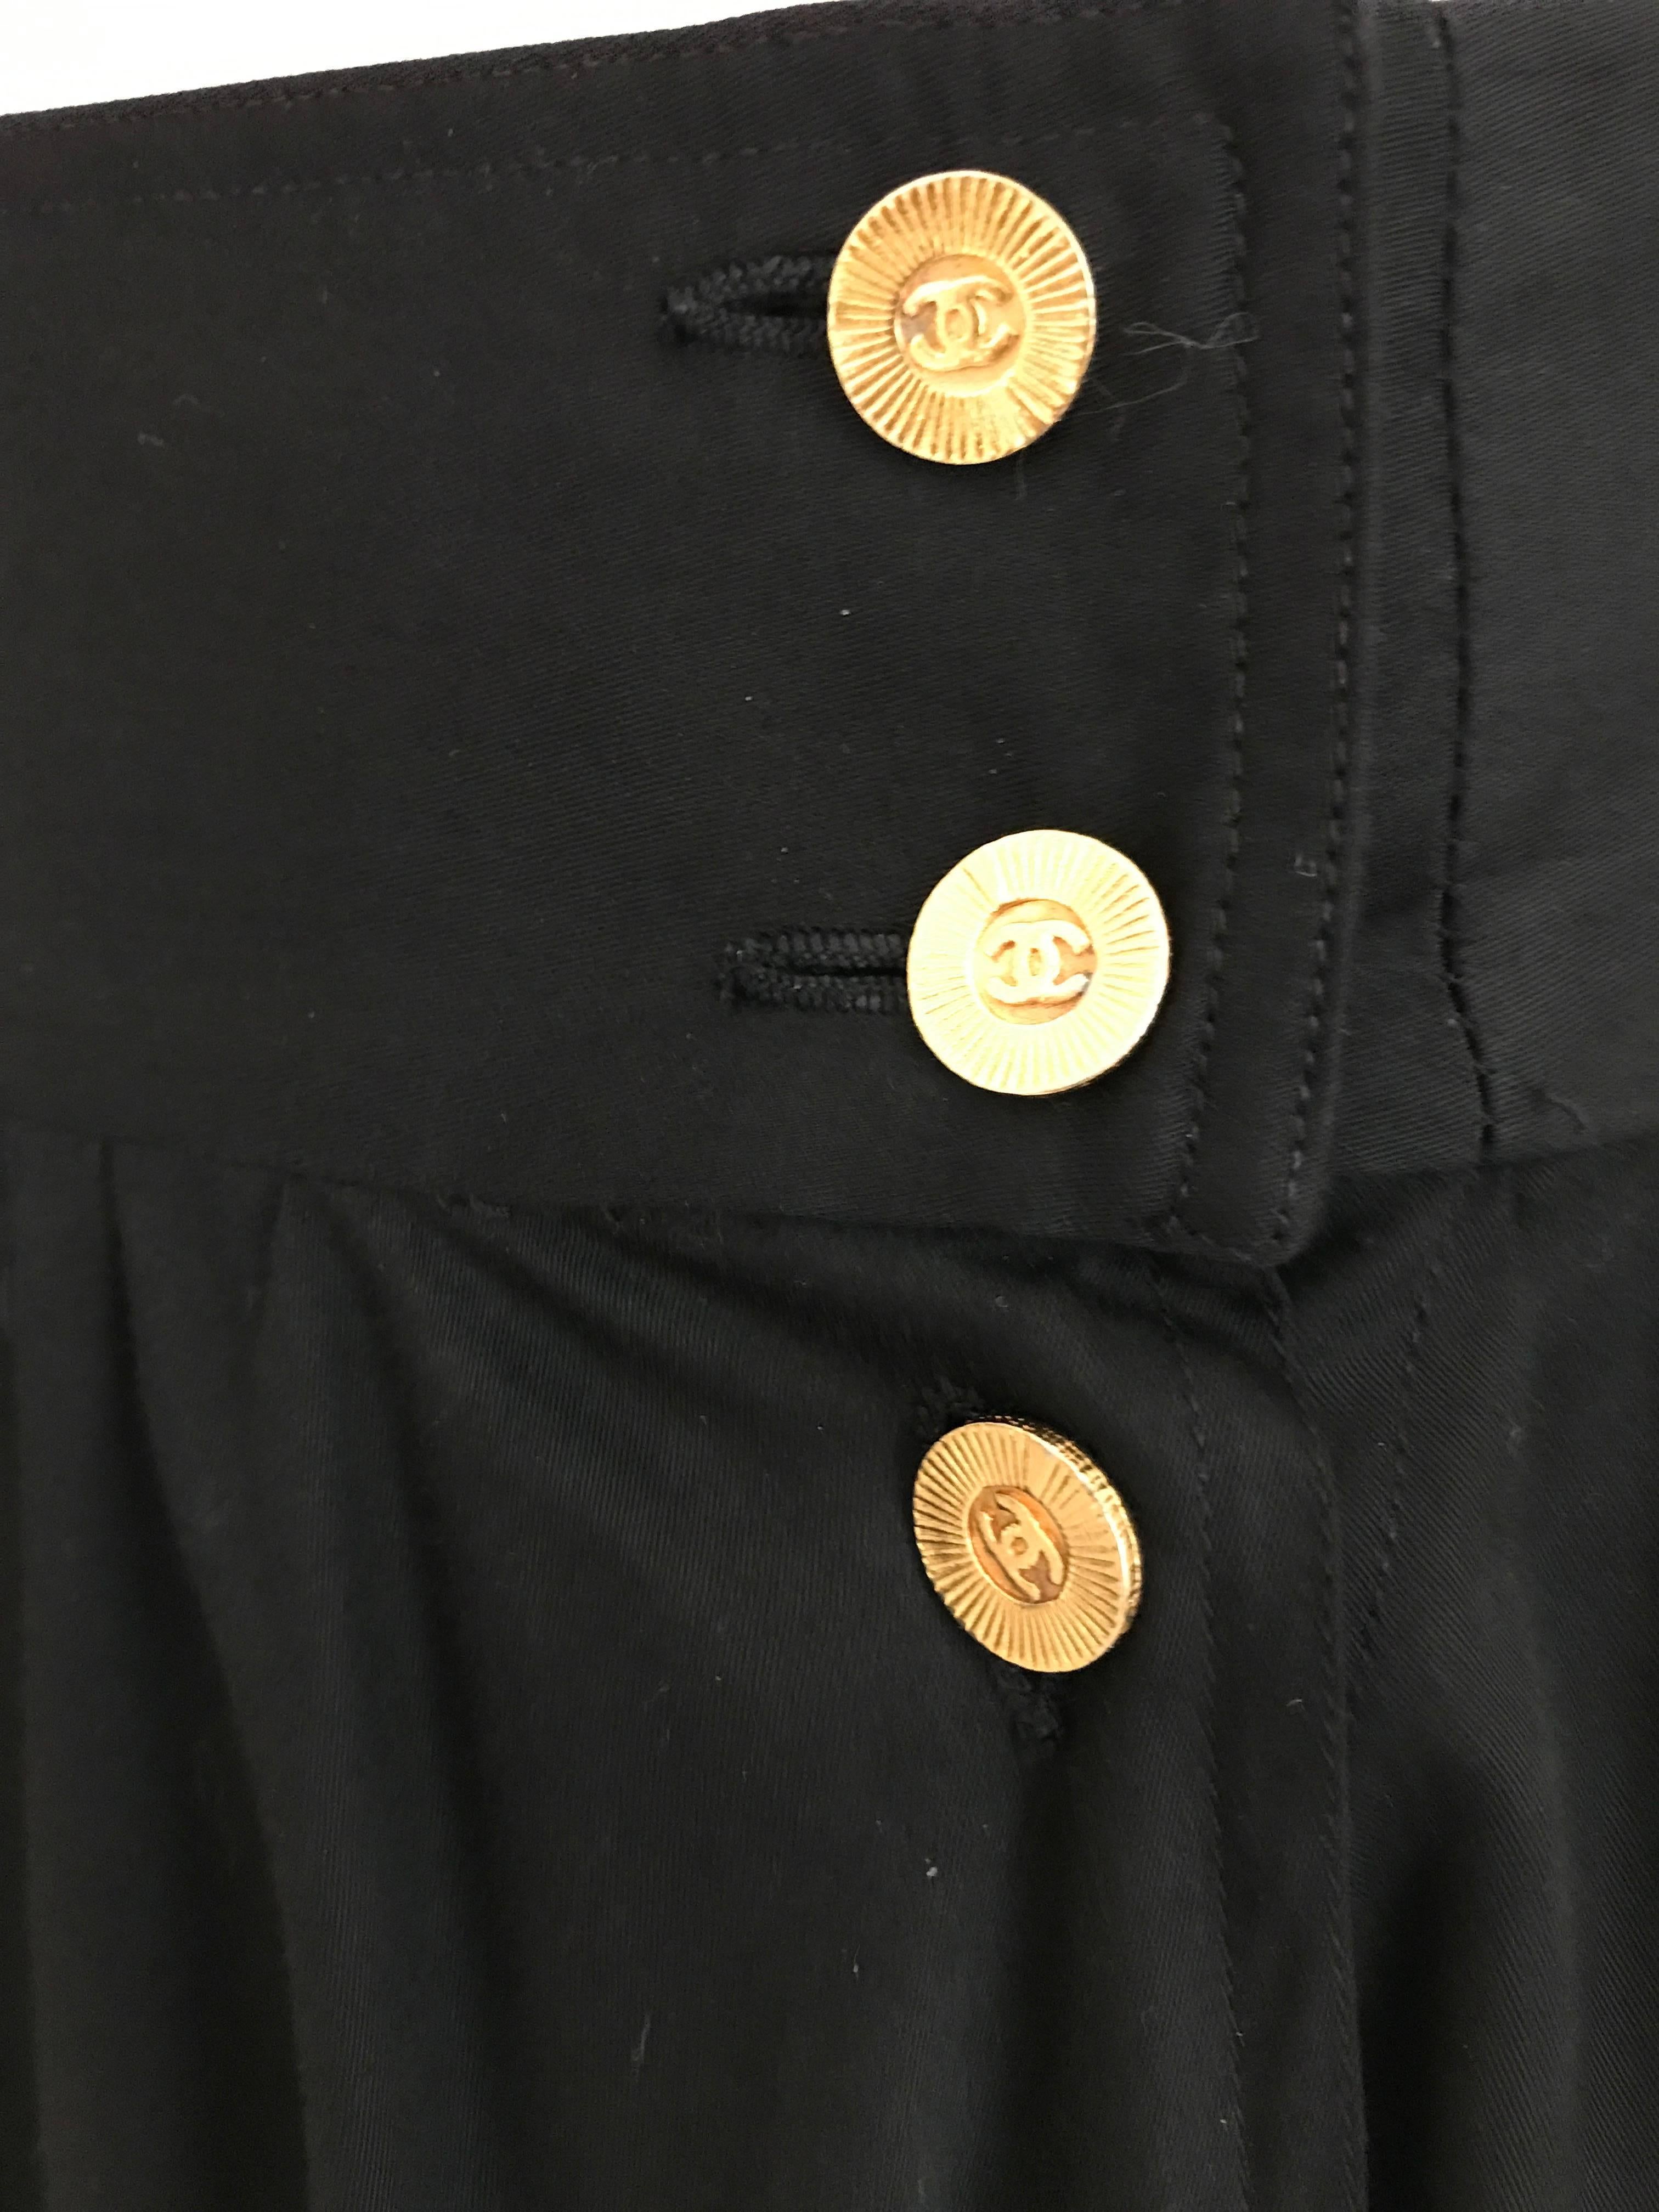 1970s CHANEL Black Cotton Skirt with Chanel Gold Button 1